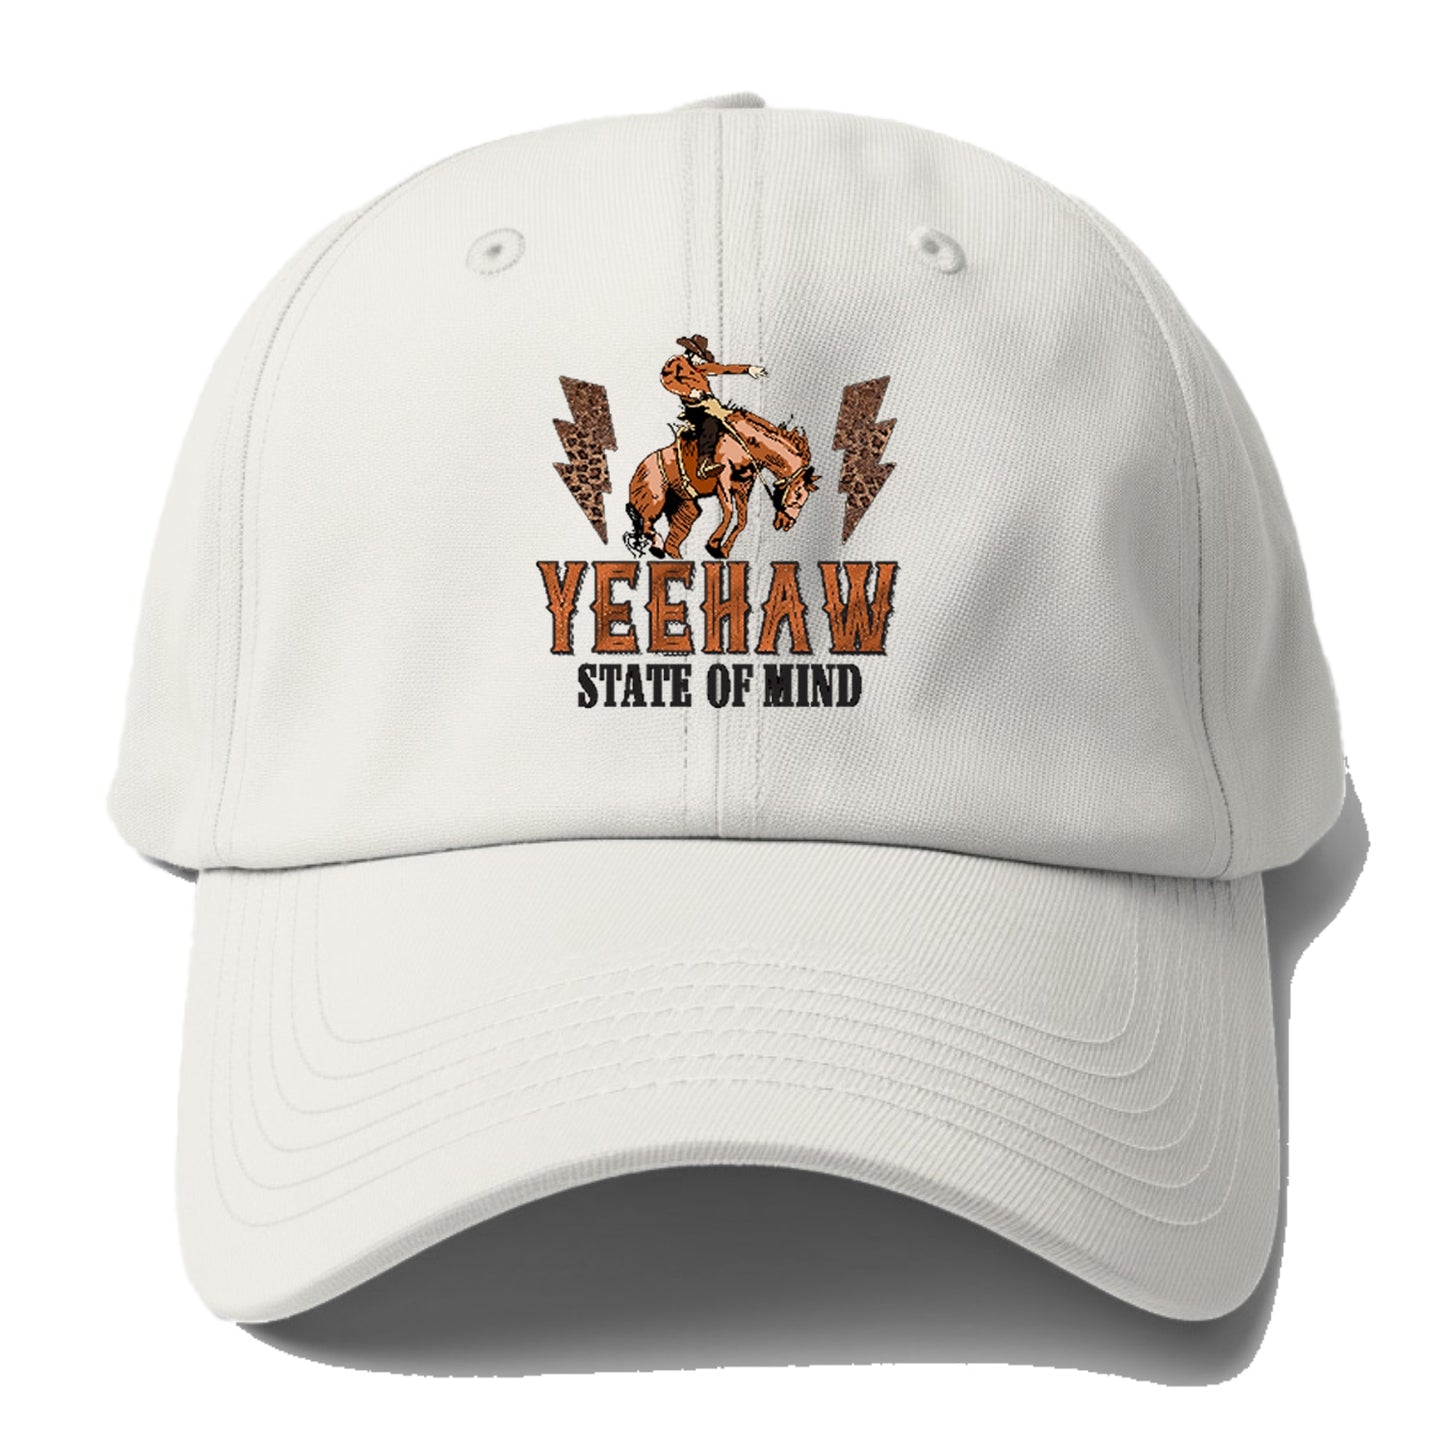 Yeehaw State Of Mind Hat